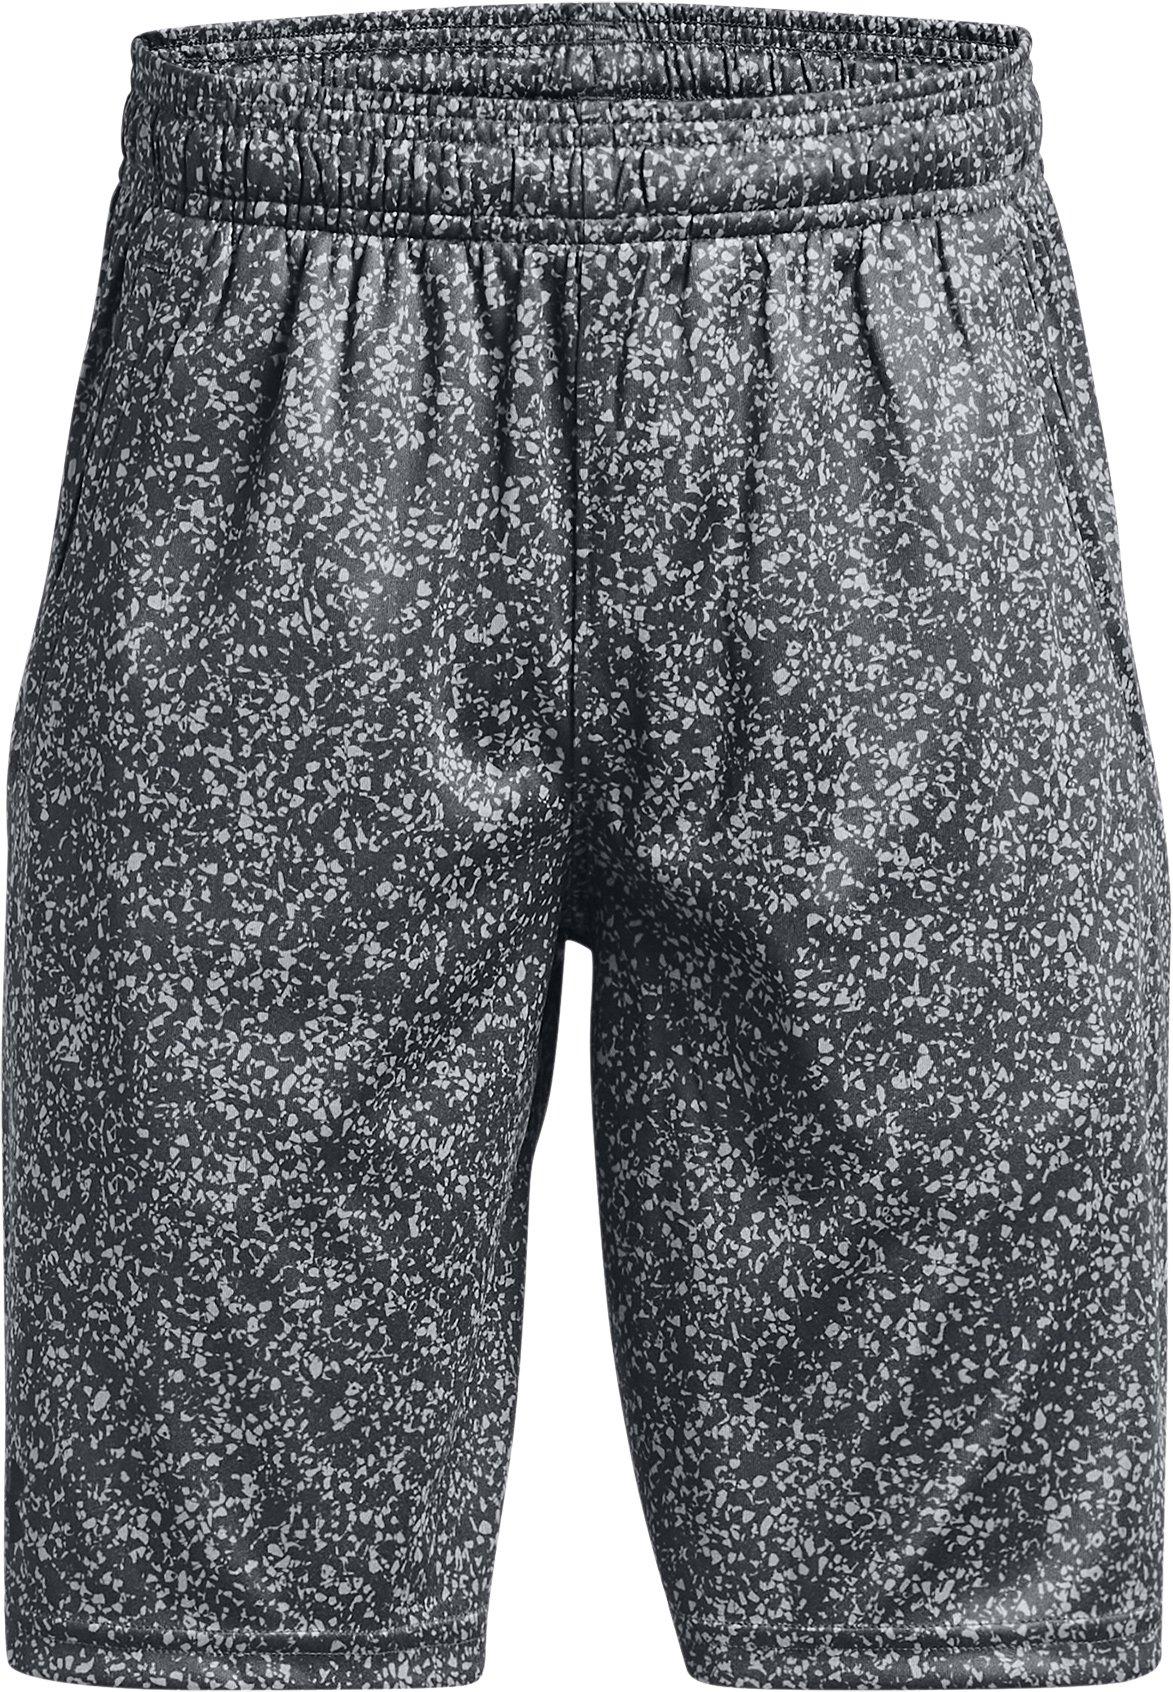 Under Armour Renegade 3.0 PRTD Shorts-GRY L